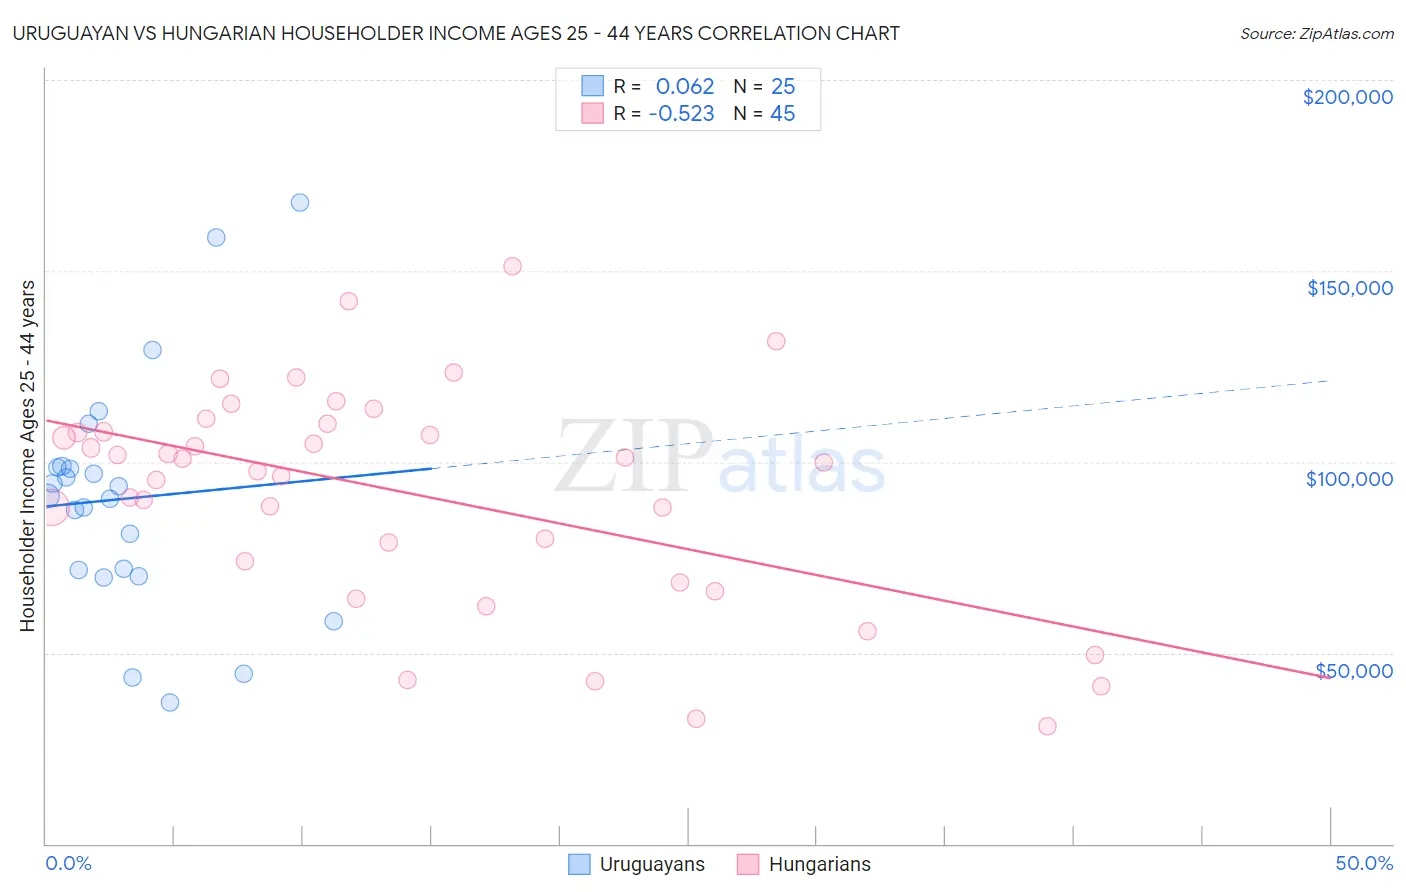 Uruguayan vs Hungarian Householder Income Ages 25 - 44 years